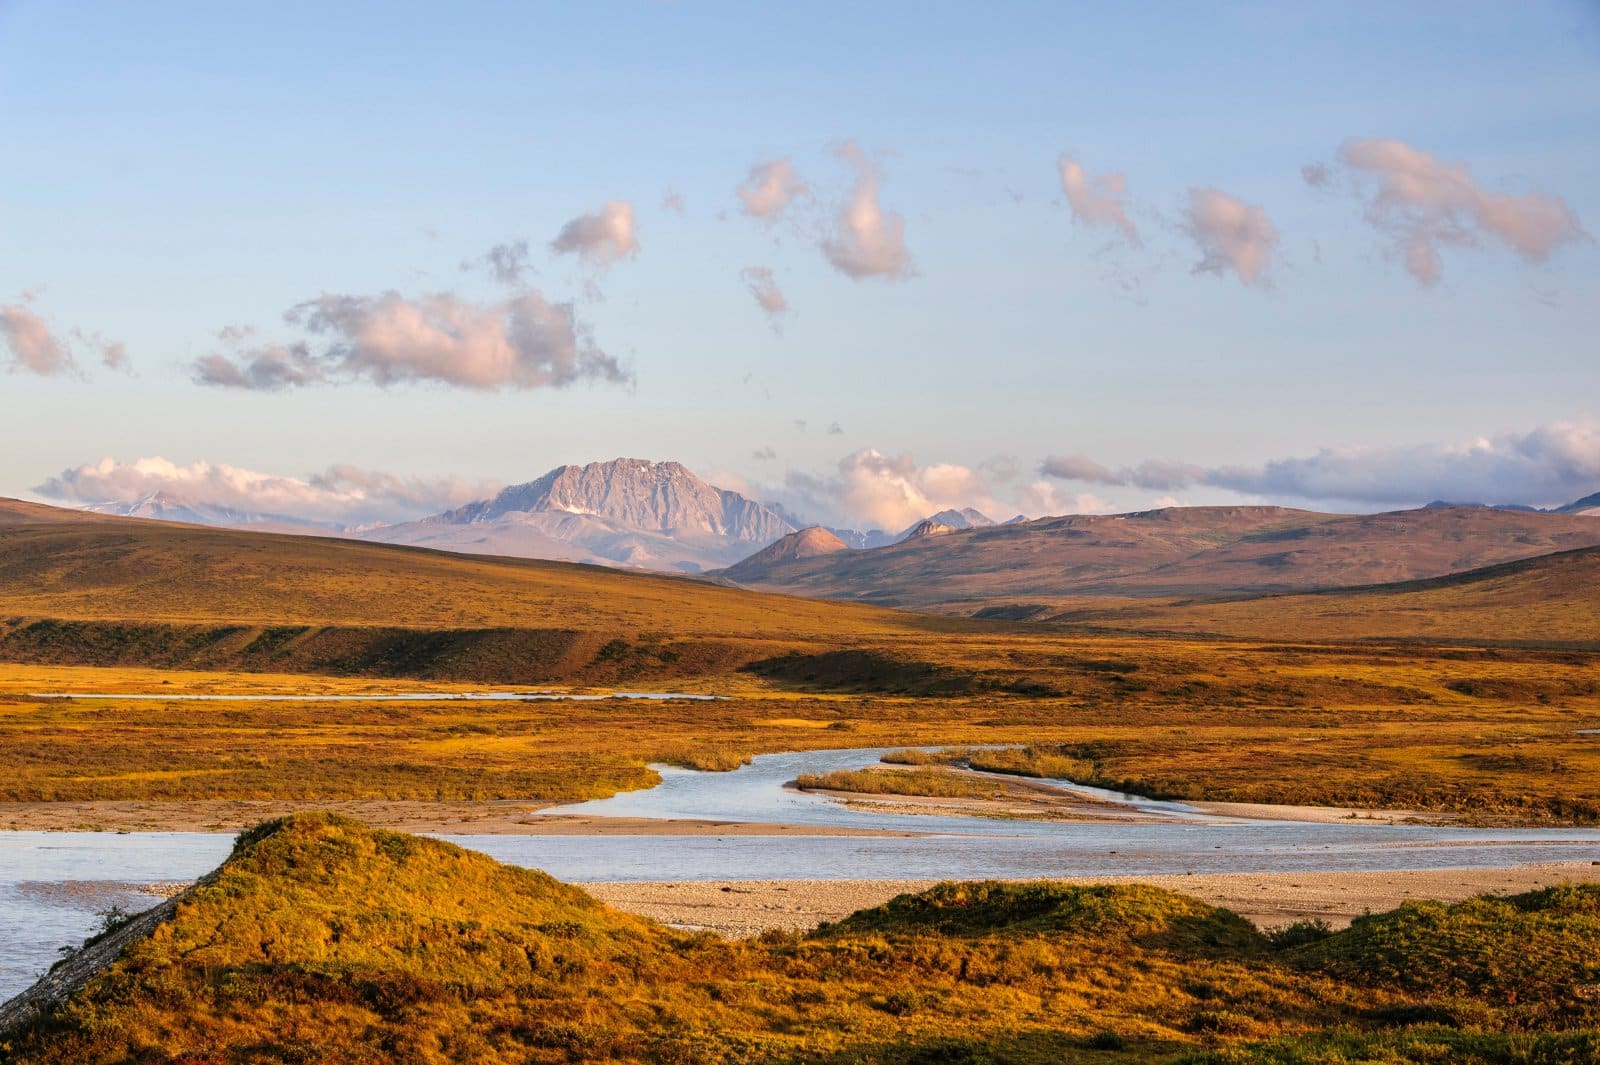 <p class="wp-caption-text">Image Credit: Shutterstock / Danita Delimont</p>  <p><span>Flowing through the Arctic wilderness of the Gates of the Arctic National Park and Noatak National Preserve, the Noatak River is one of the longest undisturbed rivers in the United States. This remote river offers an unparalleled opportunity for adventurers to immerse themselves in a landscape that has remained unchanged for thousands of years. The Noatak River basin is a haven for wildlife, including grizzly bears, wolves, and a variety of migratory birds, providing paddlers with frequent wildlife viewing opportunities. The river itself caters to a range of skill levels, with gentle flows through broad valleys as well as more challenging sections that will test the abilities of experienced canoeists. The vastness of the Alaskan wilderness, combined with the midnight sun of the Arctic summer, makes a canoe trip on the Noatak River a truly epic adventure.</span></p>